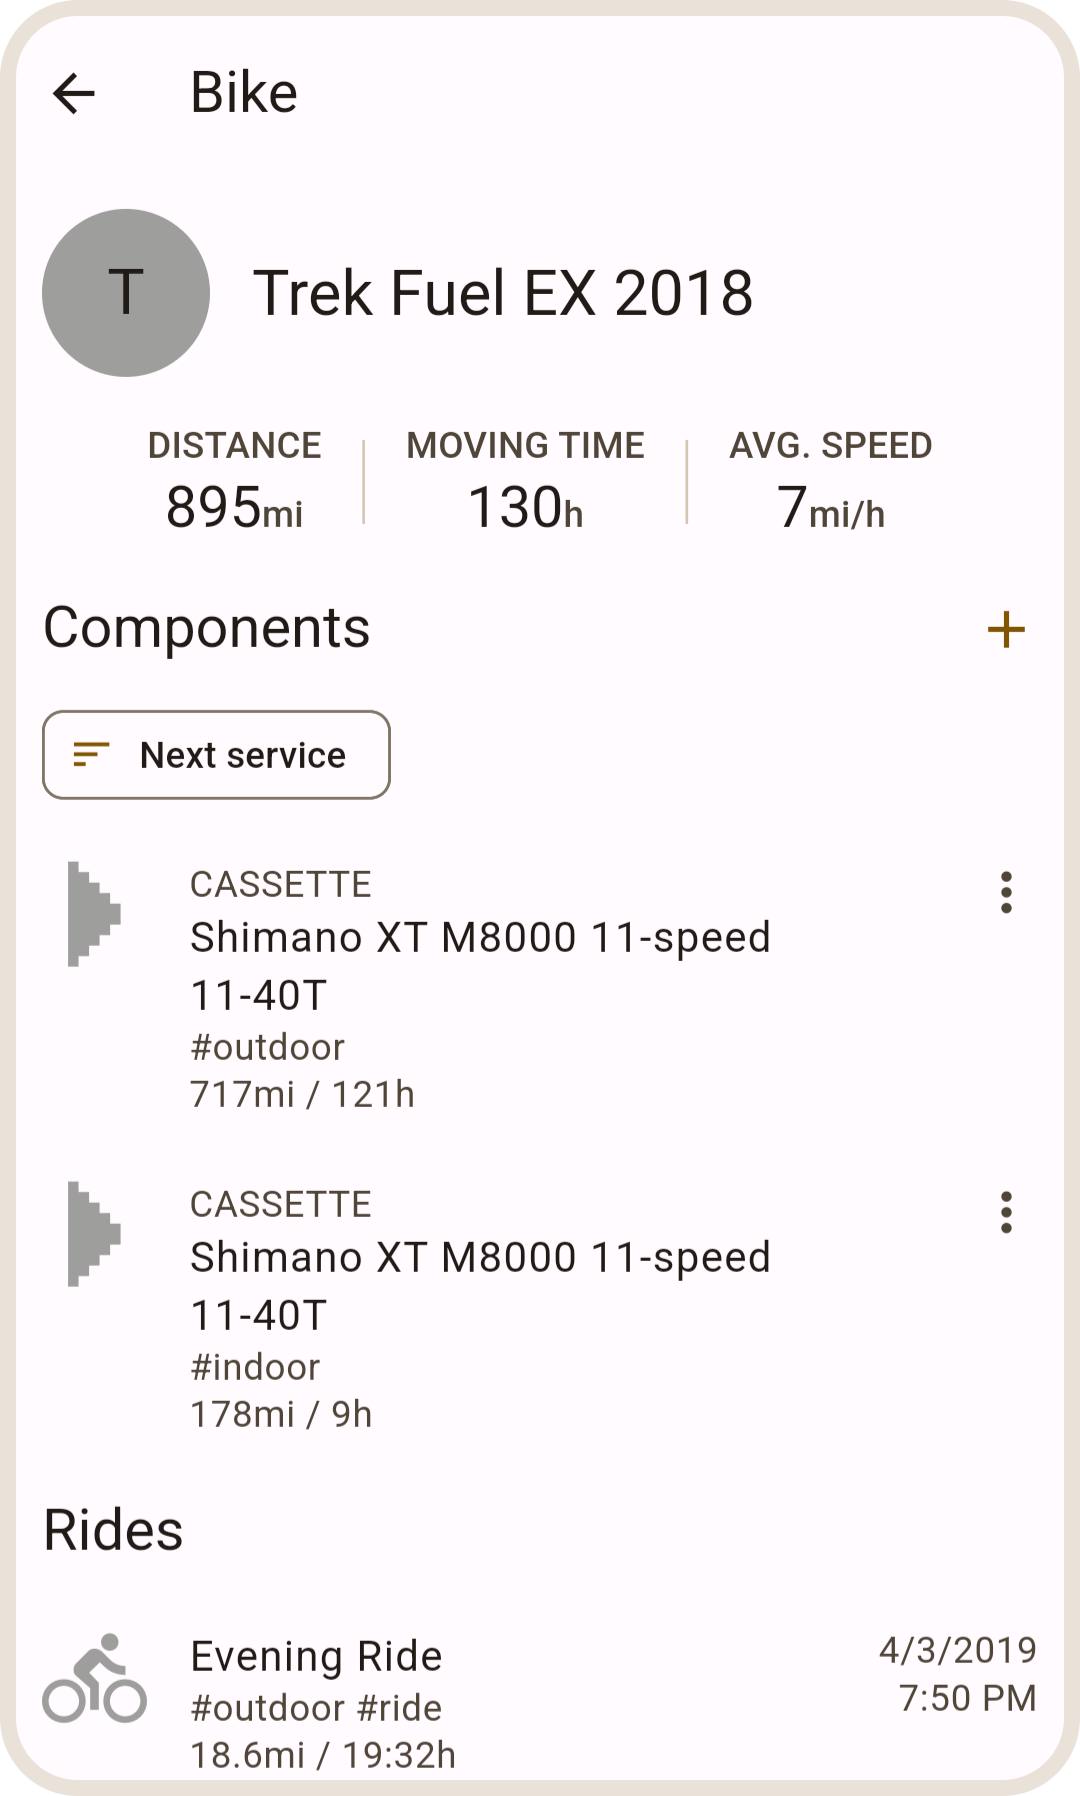 Installed cassettes for indoor and outdoor in ProBikeGarage app